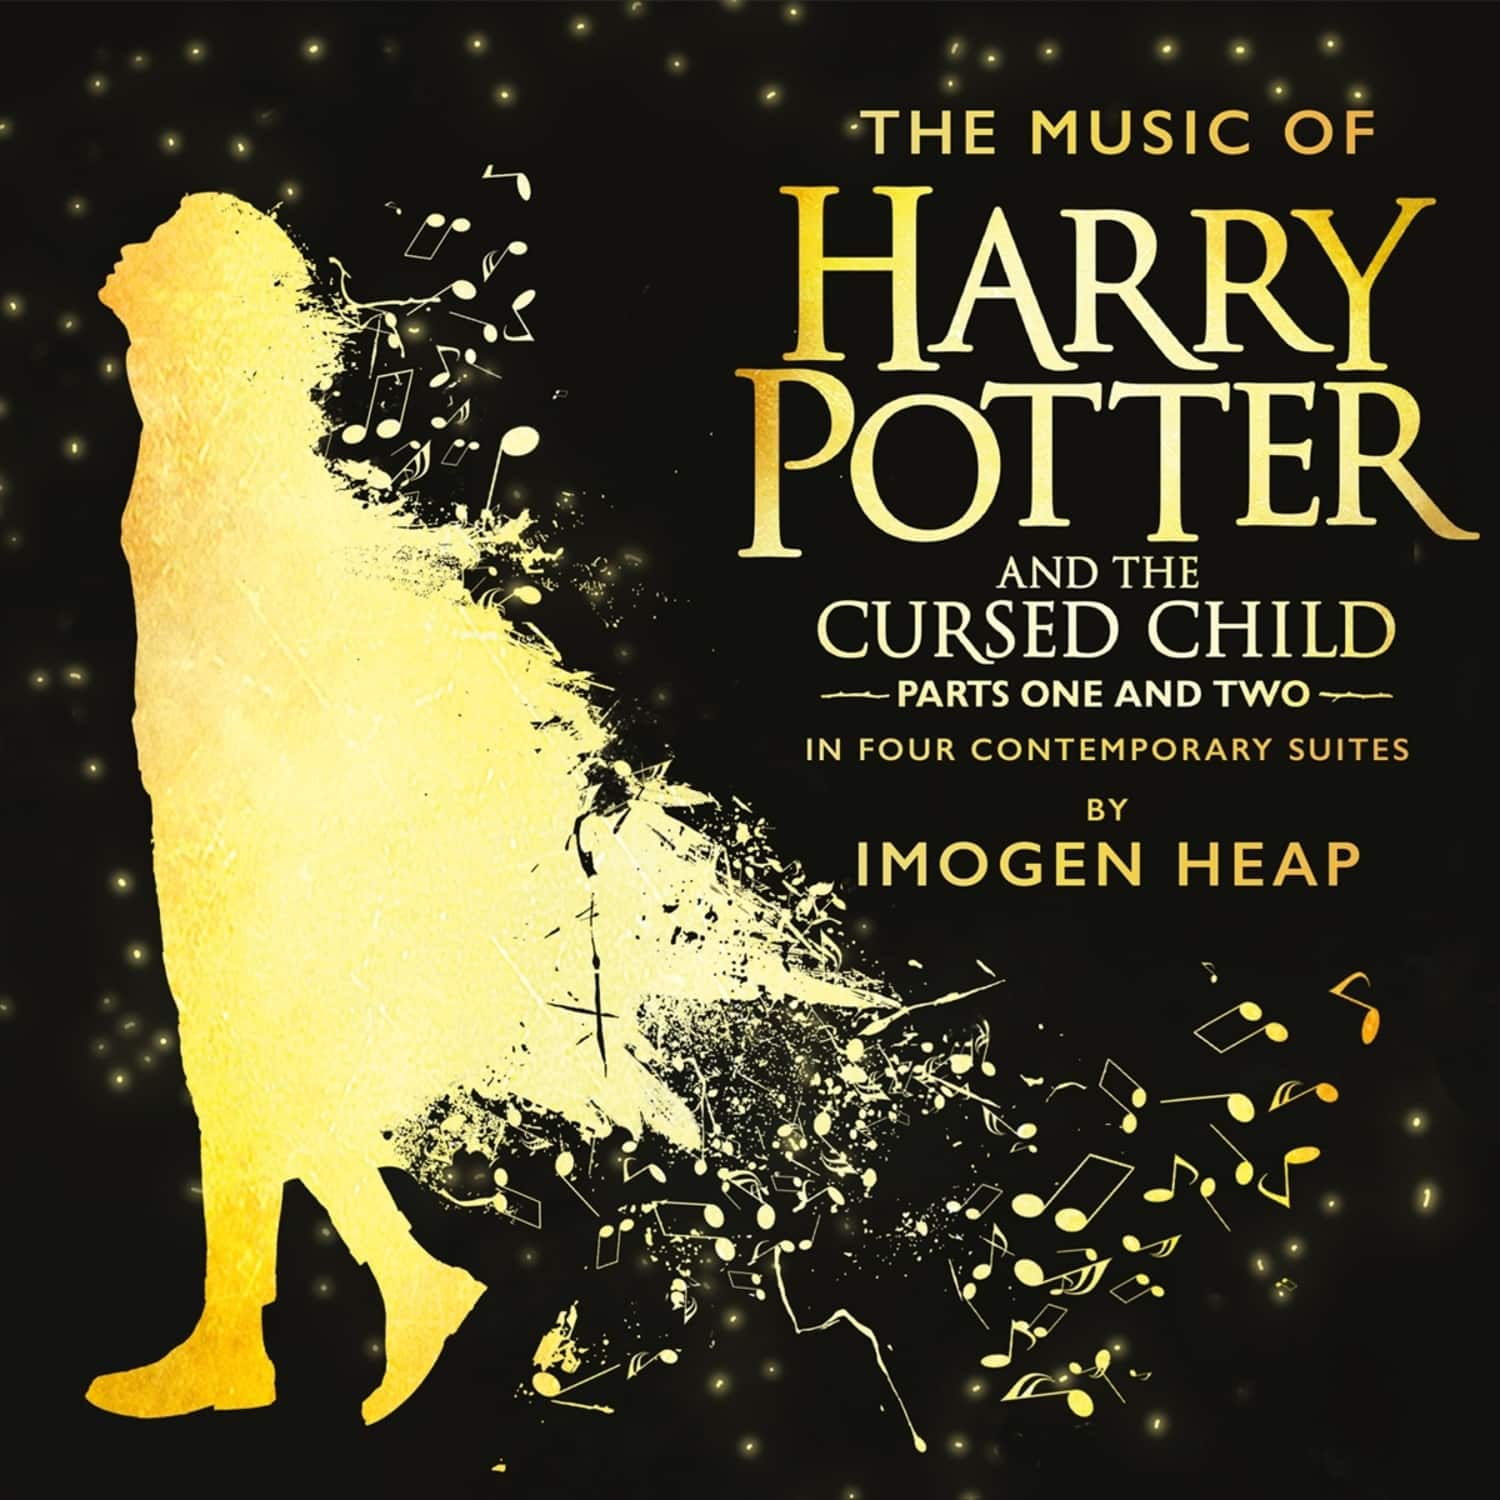 Imogen Heap - THE MUSIC OF HARRY POTTER AND THE CURSED CHILD - I 